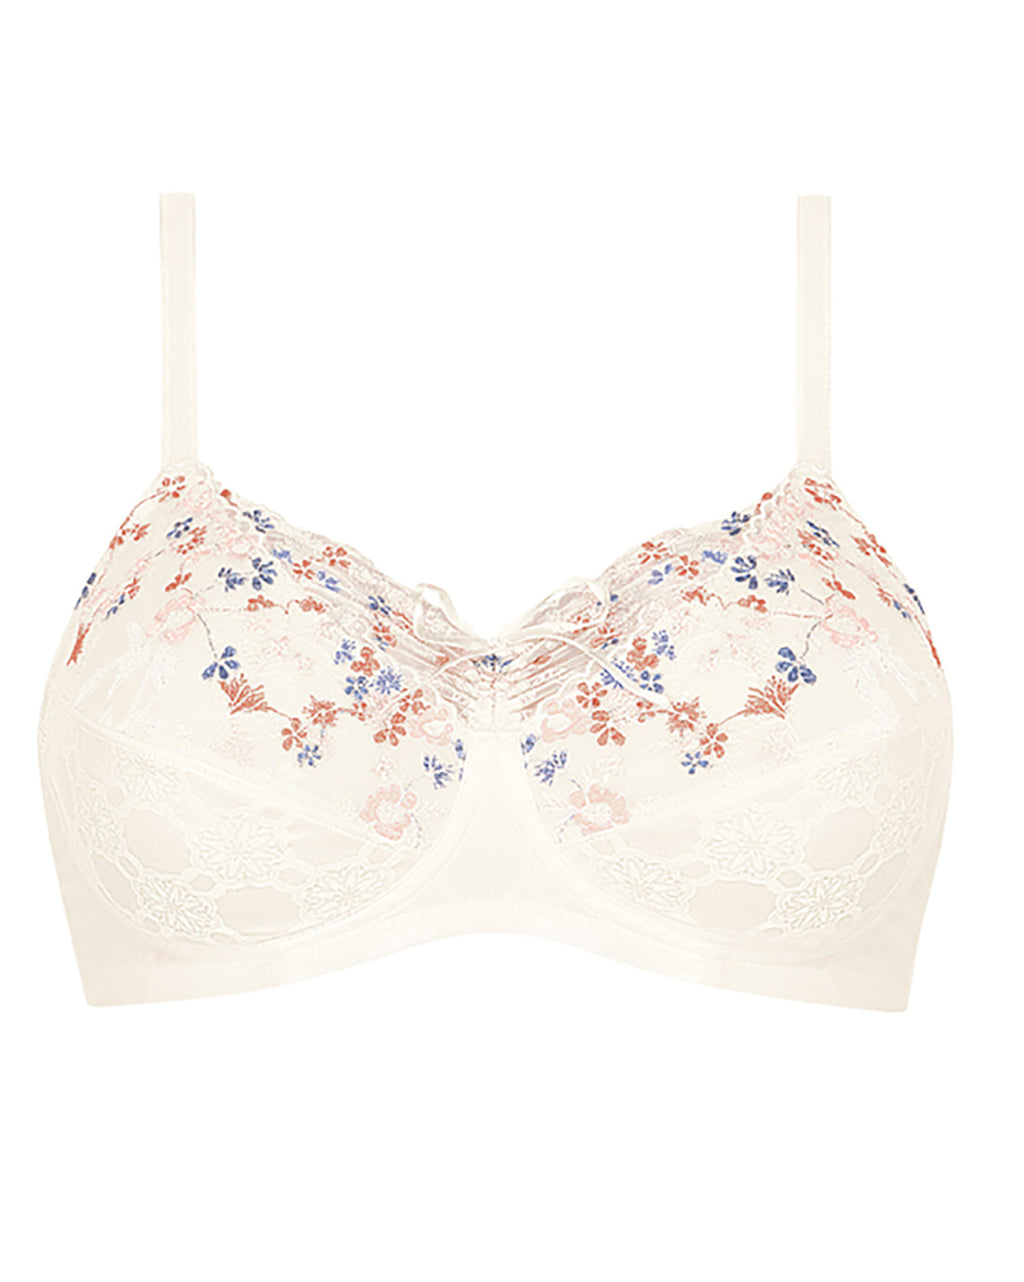 Amoena Australia - Take a second look at our Alina bra! See that